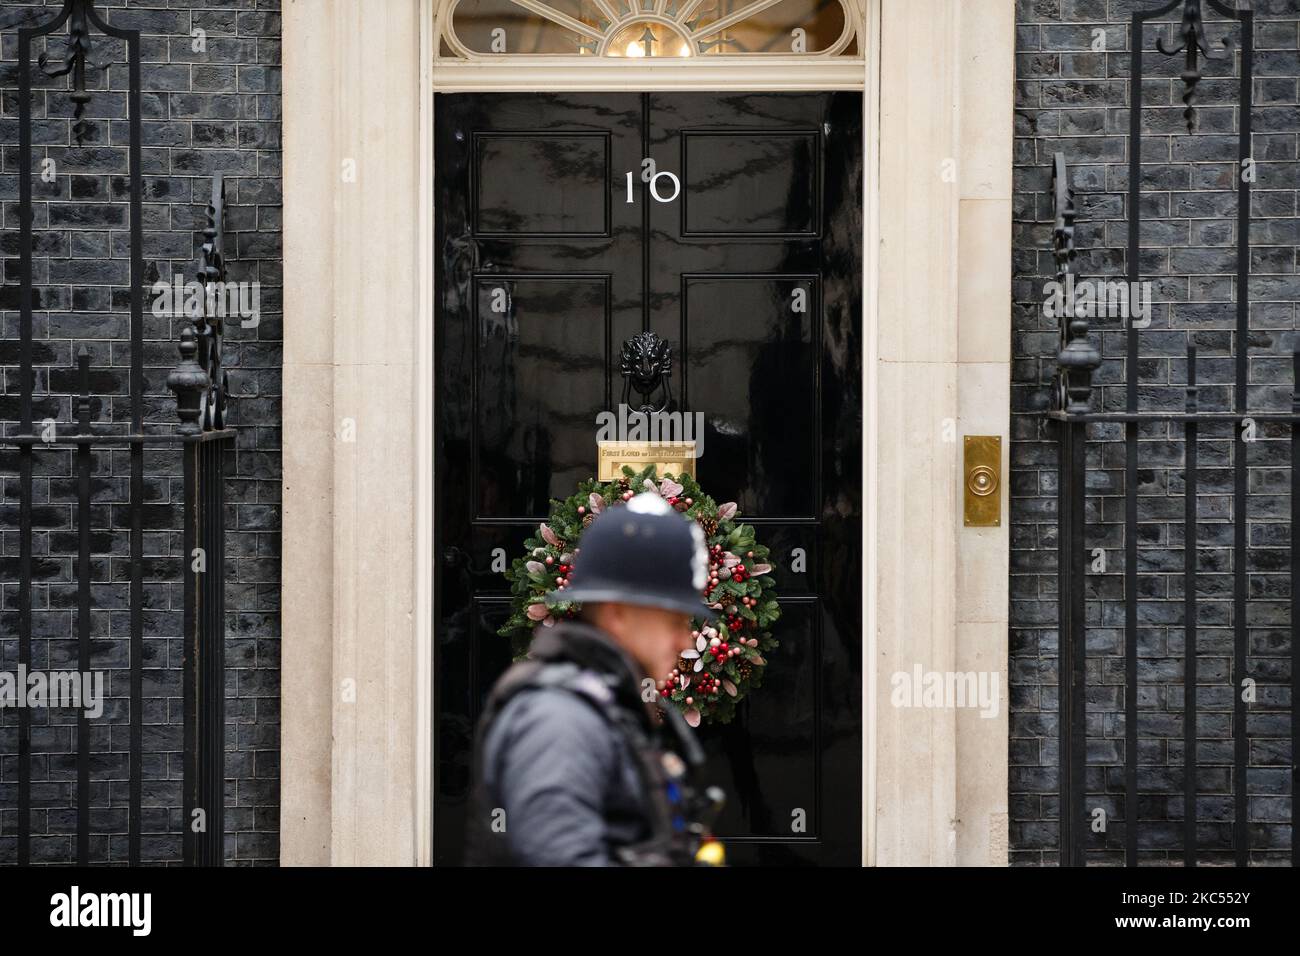 A police officer walks past the door of 10 Downing Street, on which now hangs a Christmas wreath for the festive season, in London, England, on December 2, 2020. (Photo by David Cliff/NurPhoto) Stock Photo